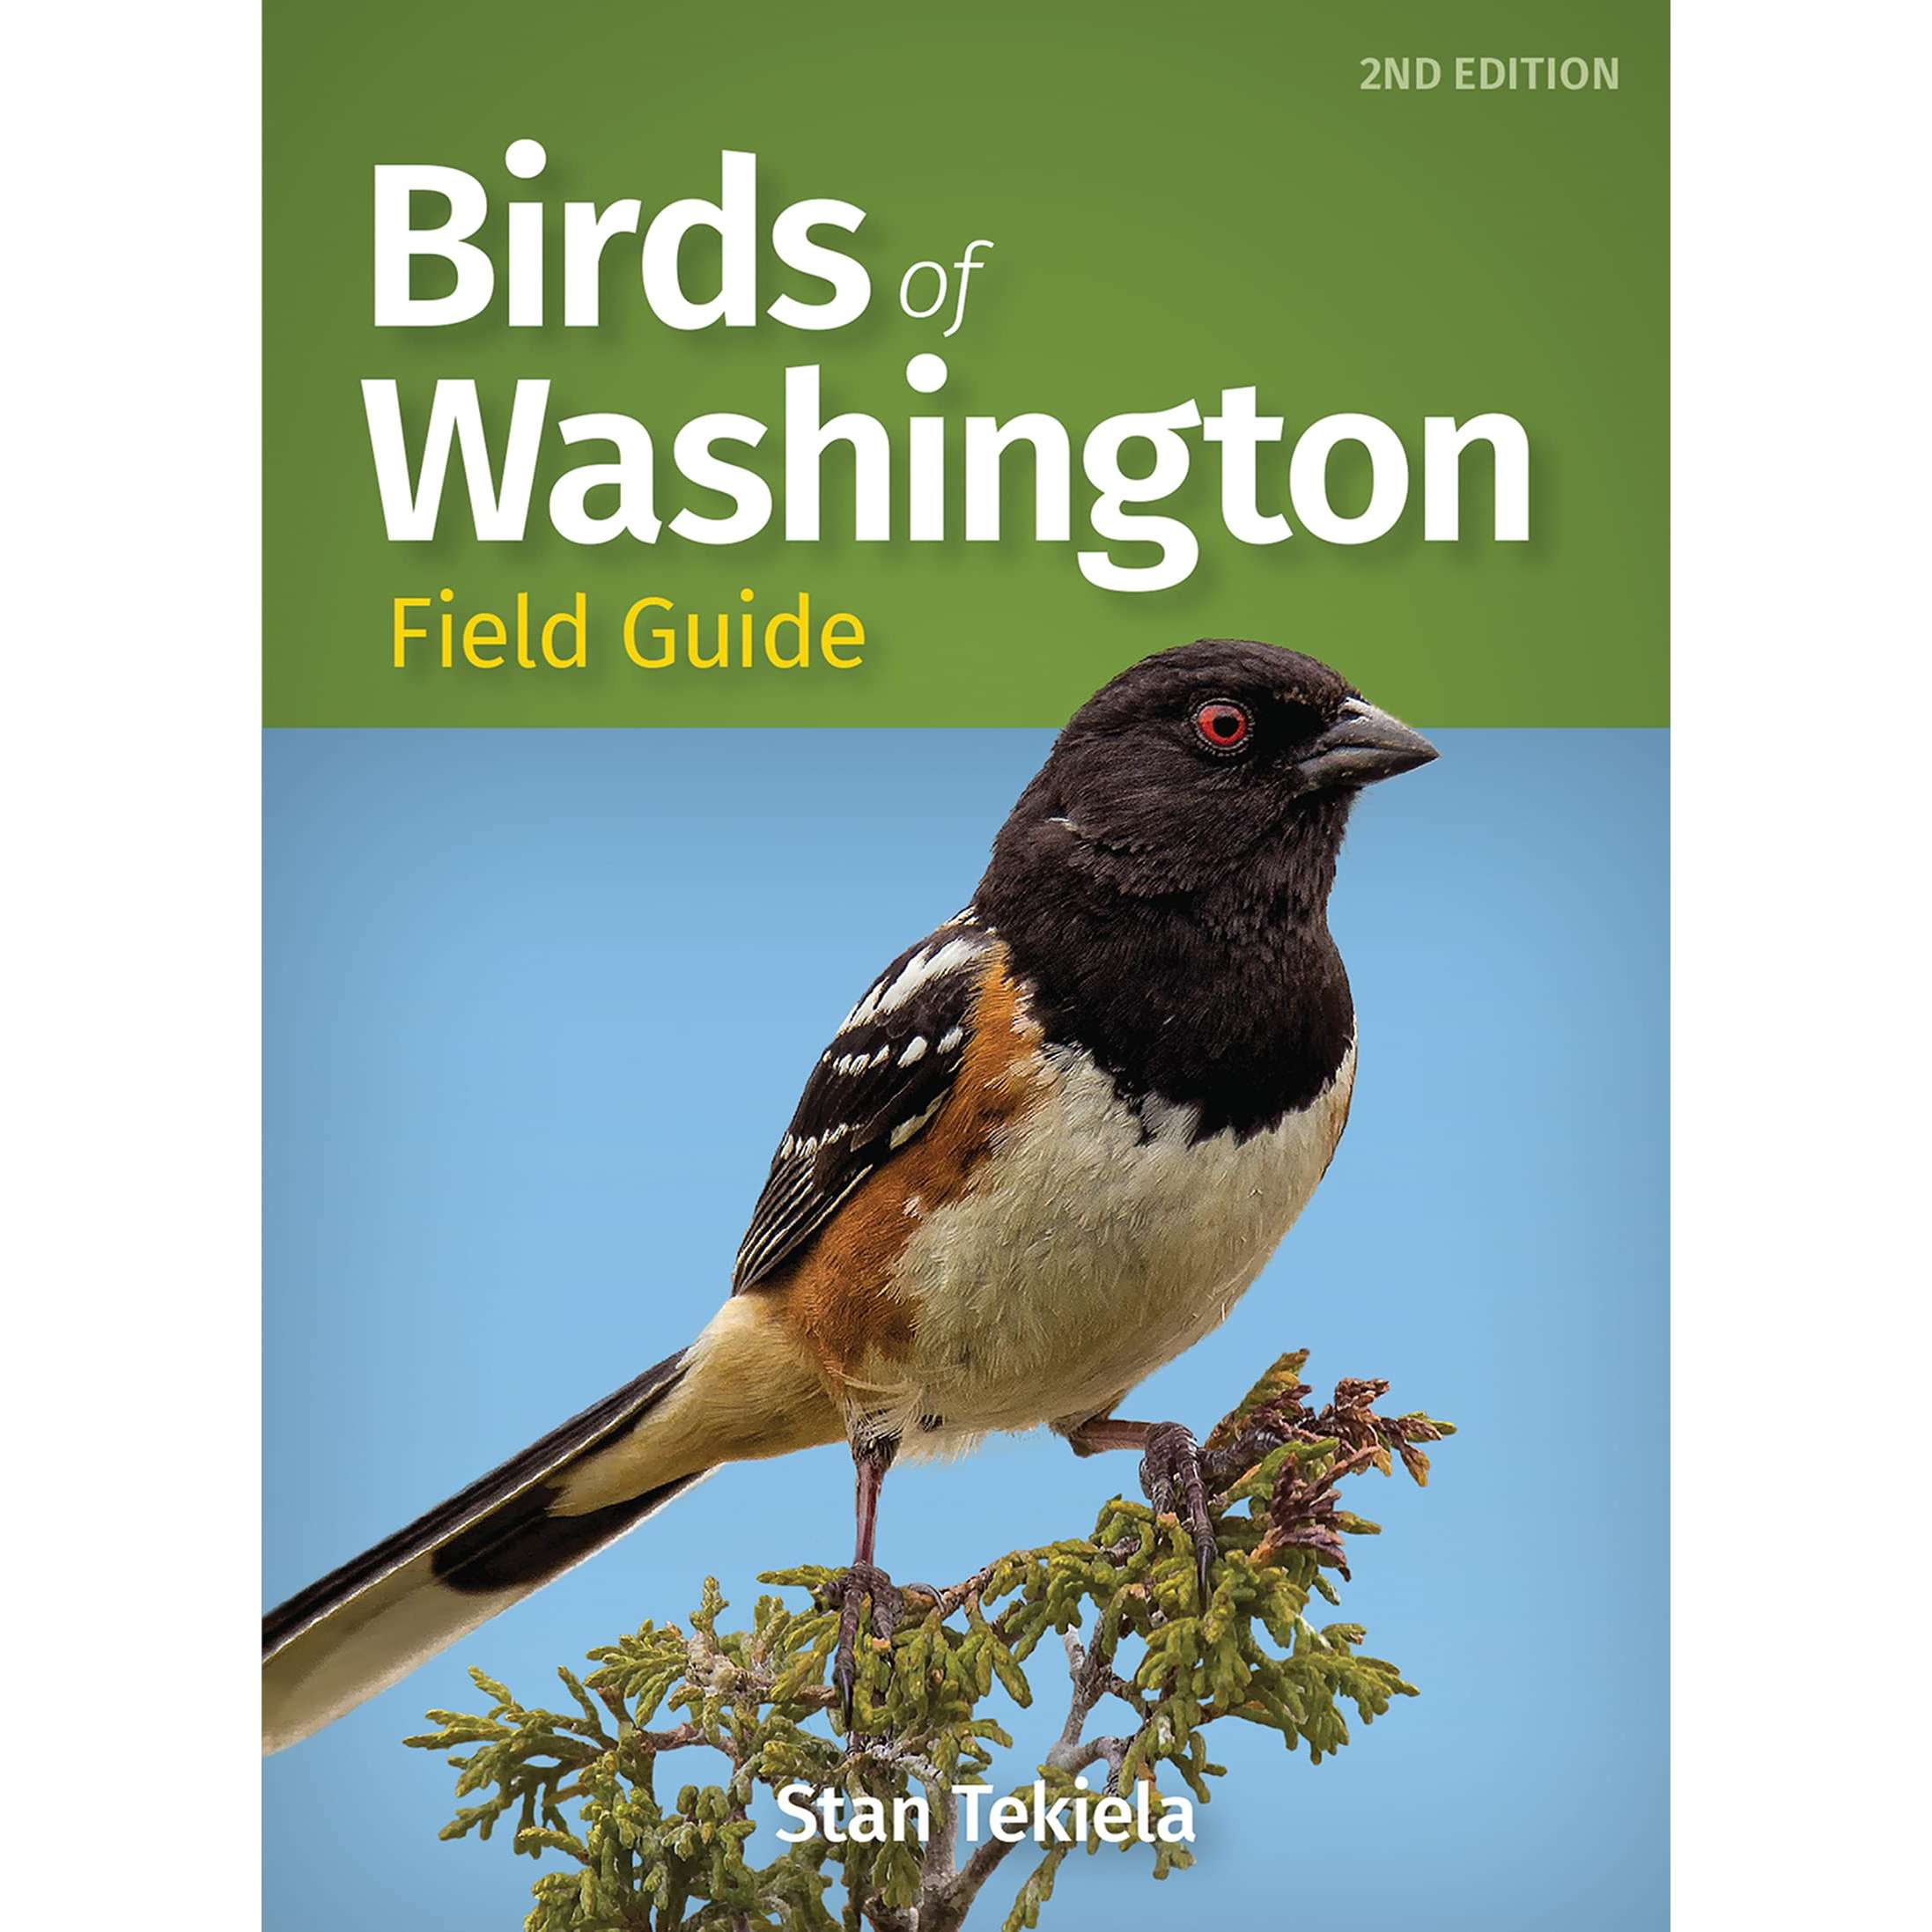 2nd　Guides　Publishing　Field　::　Travel　::　Outdoors,　Navigational　All　Camping　Guide,　Identification　Wholesale　Books　Gifts,　Outdoors　Birds　::　Washington　Demand　Ed.　Cay　Paradise　Books,　Charts,　On　Bird　of